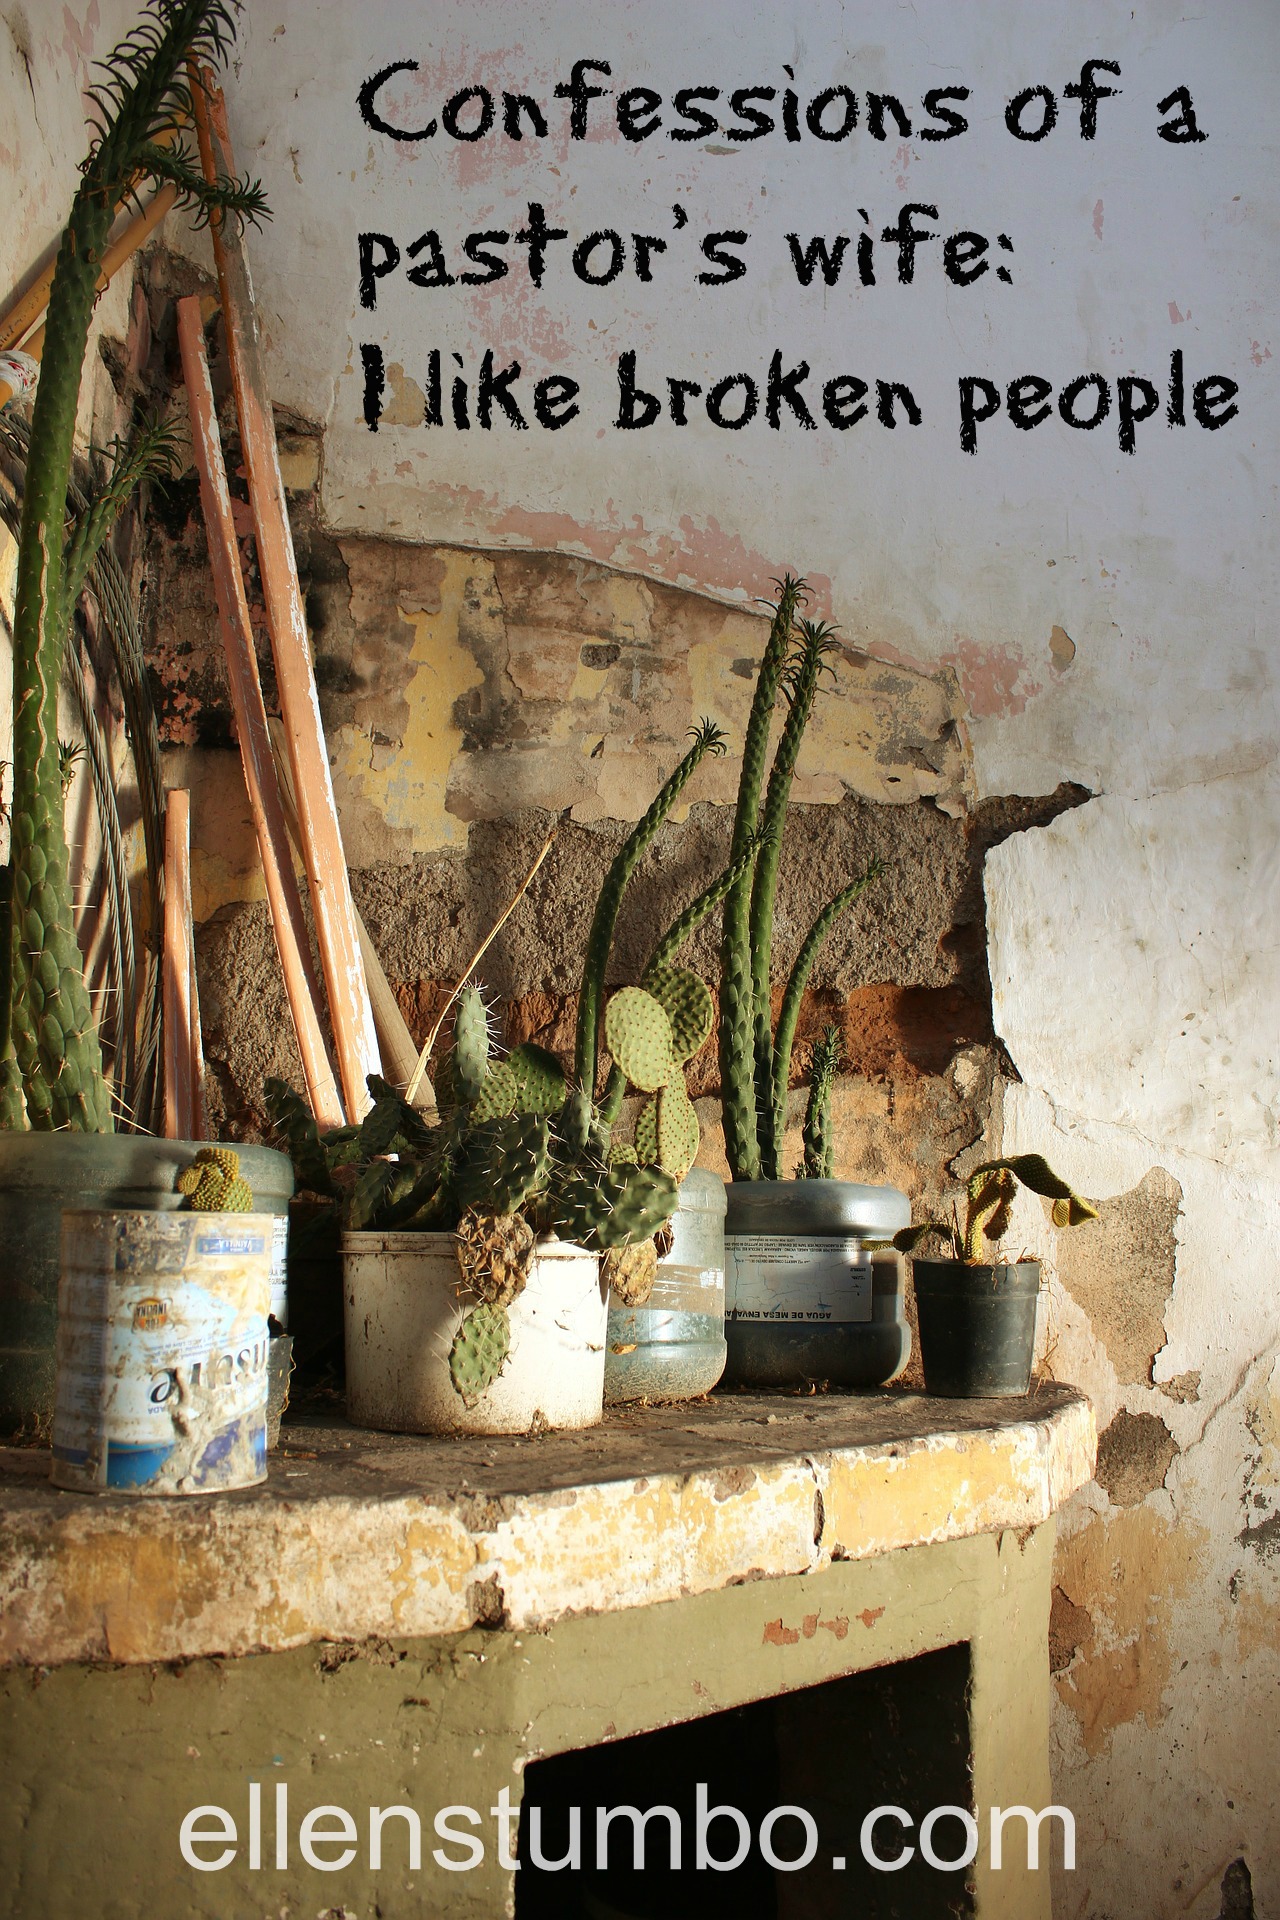 Confessions of a pastor’s wife: I like broken people